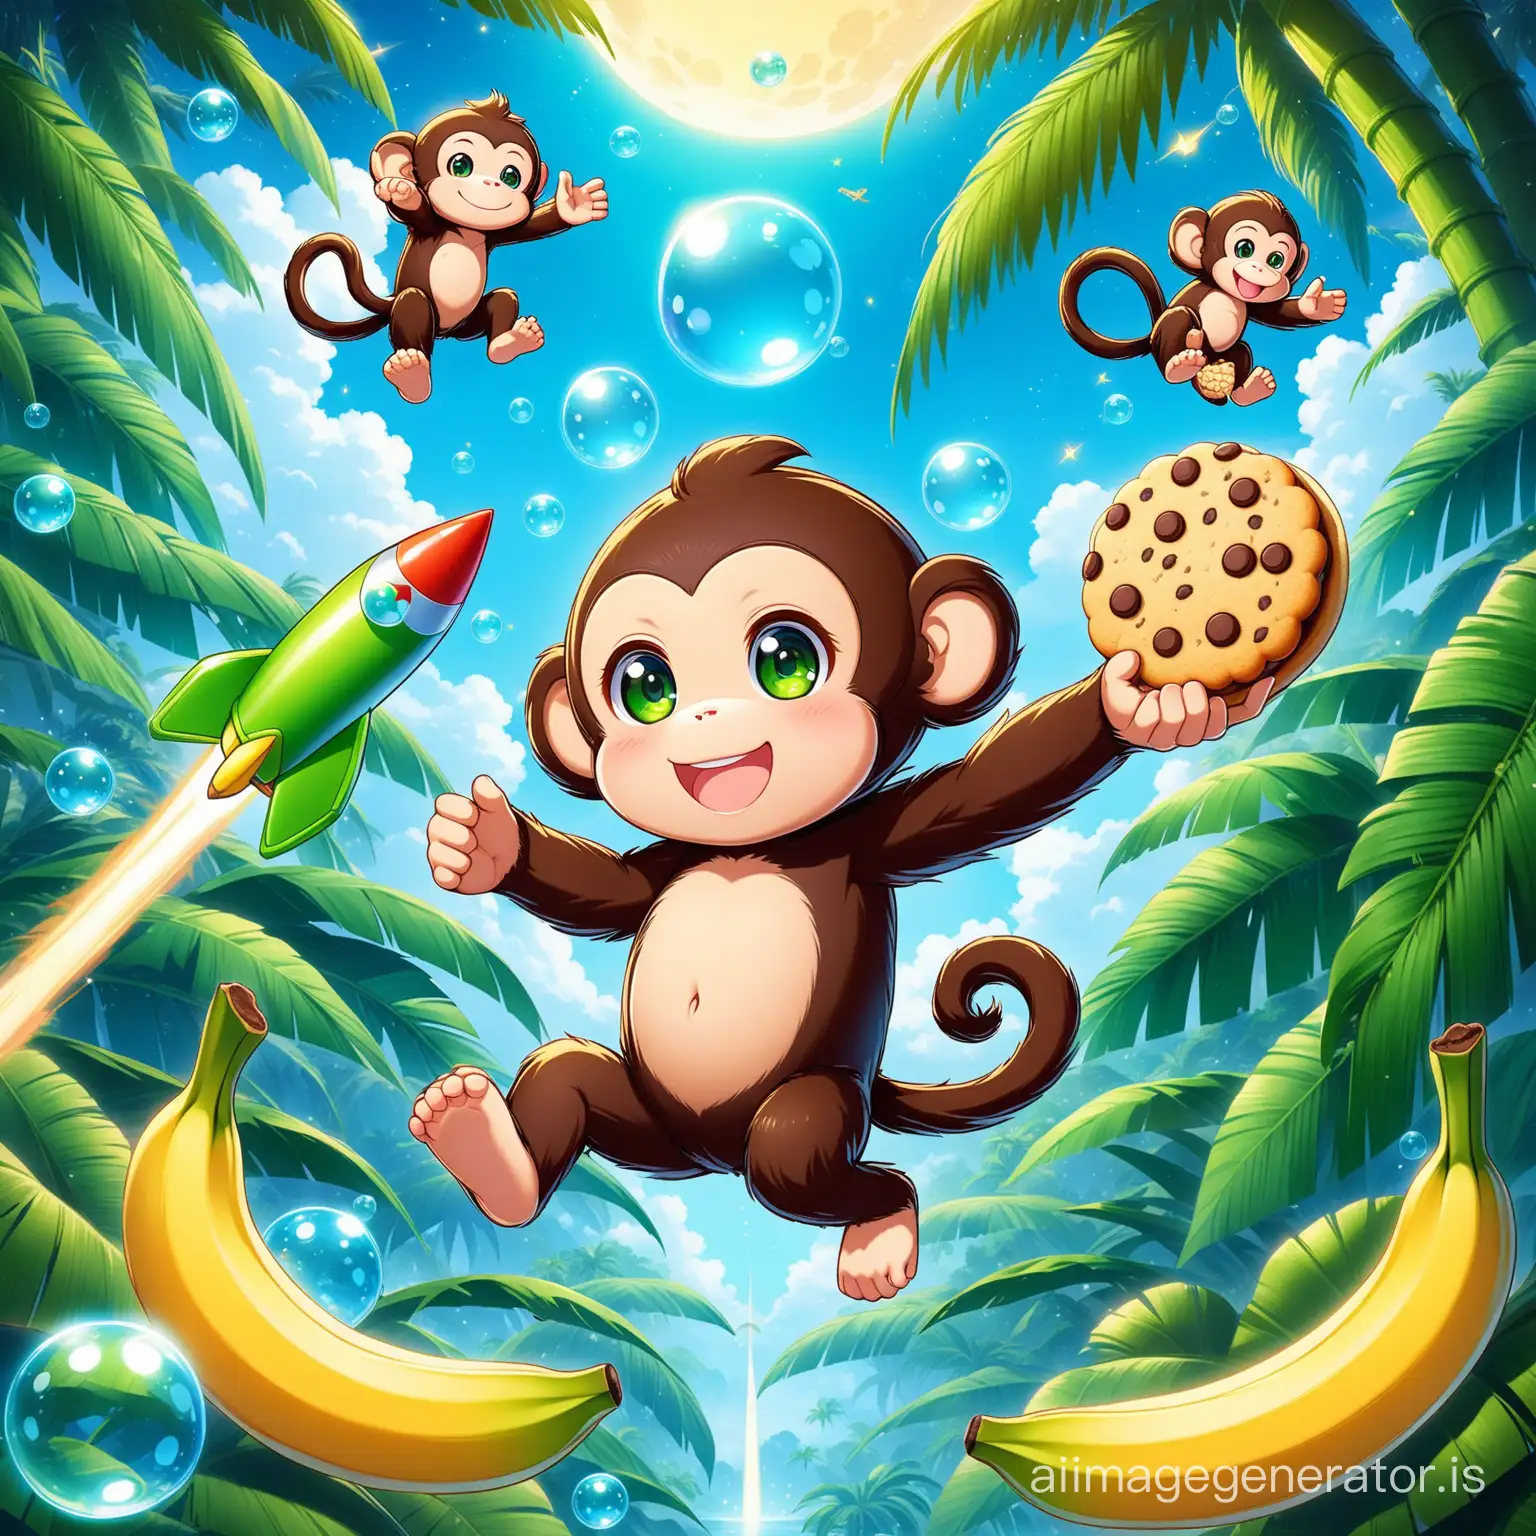 A little black happy cute monkey cookie with green eye and smile have banana in hands flying on the jungle with super detail and High Quality
big and blue Bubble and floating cookie are seen everywhere
Details are evident beautifully and with great precision
i see a  green rocket in background